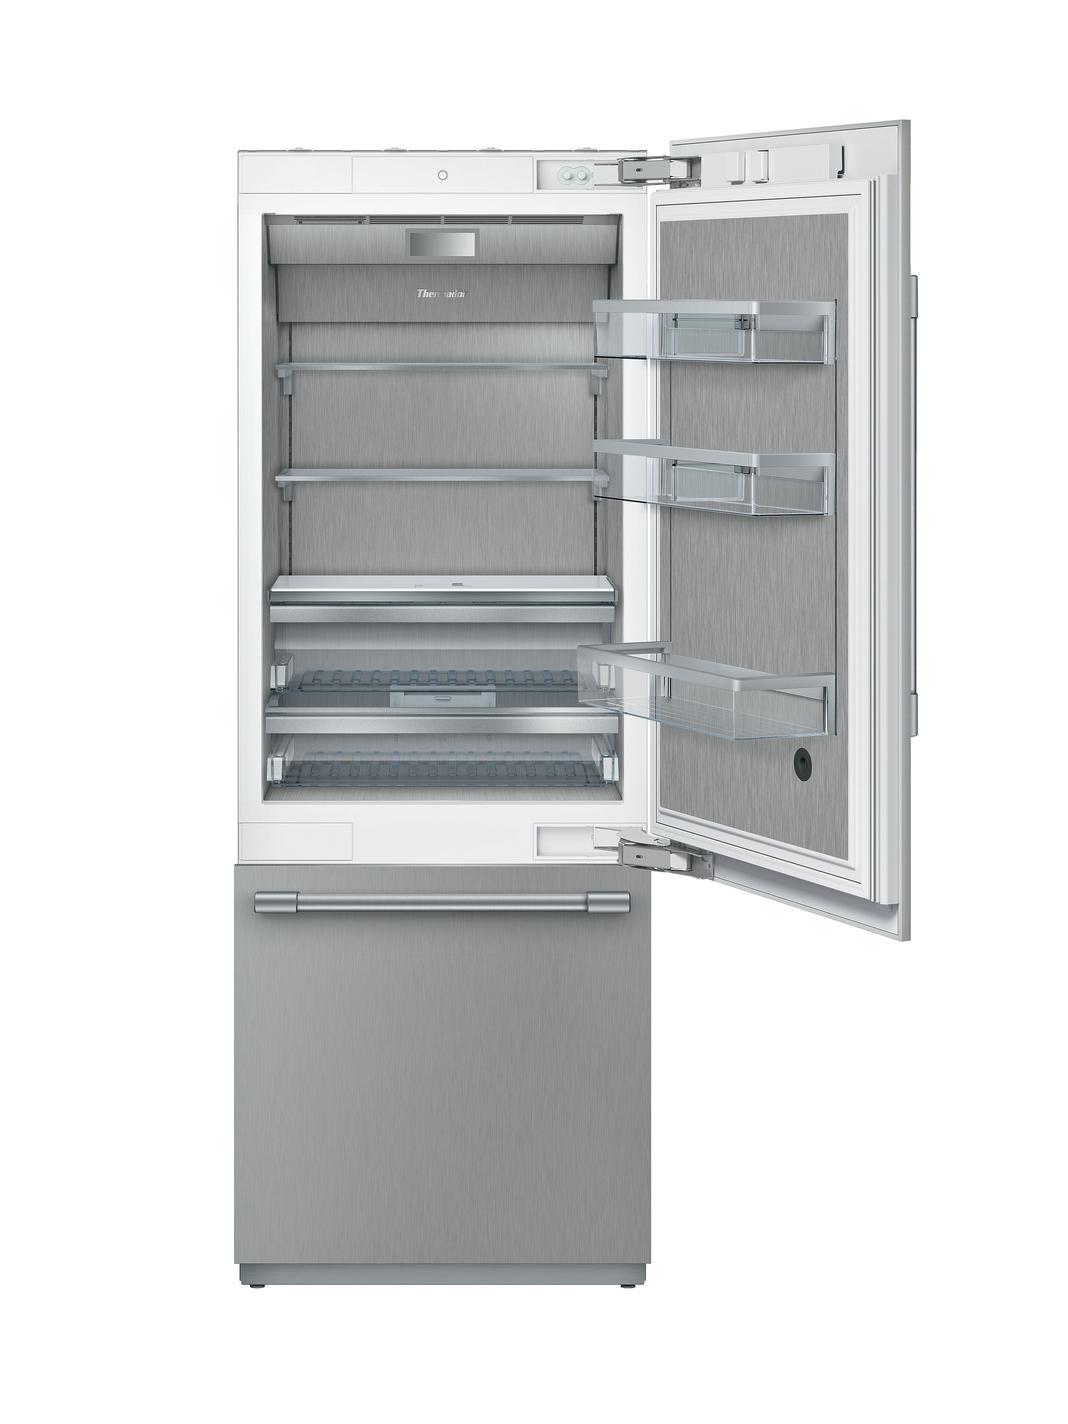 Thermador - 29.75 Inch 16 cu. ft Built In / Integrated Bottom Mount Refrigerator in Panel Ready (Open Box) - T30IB905SP